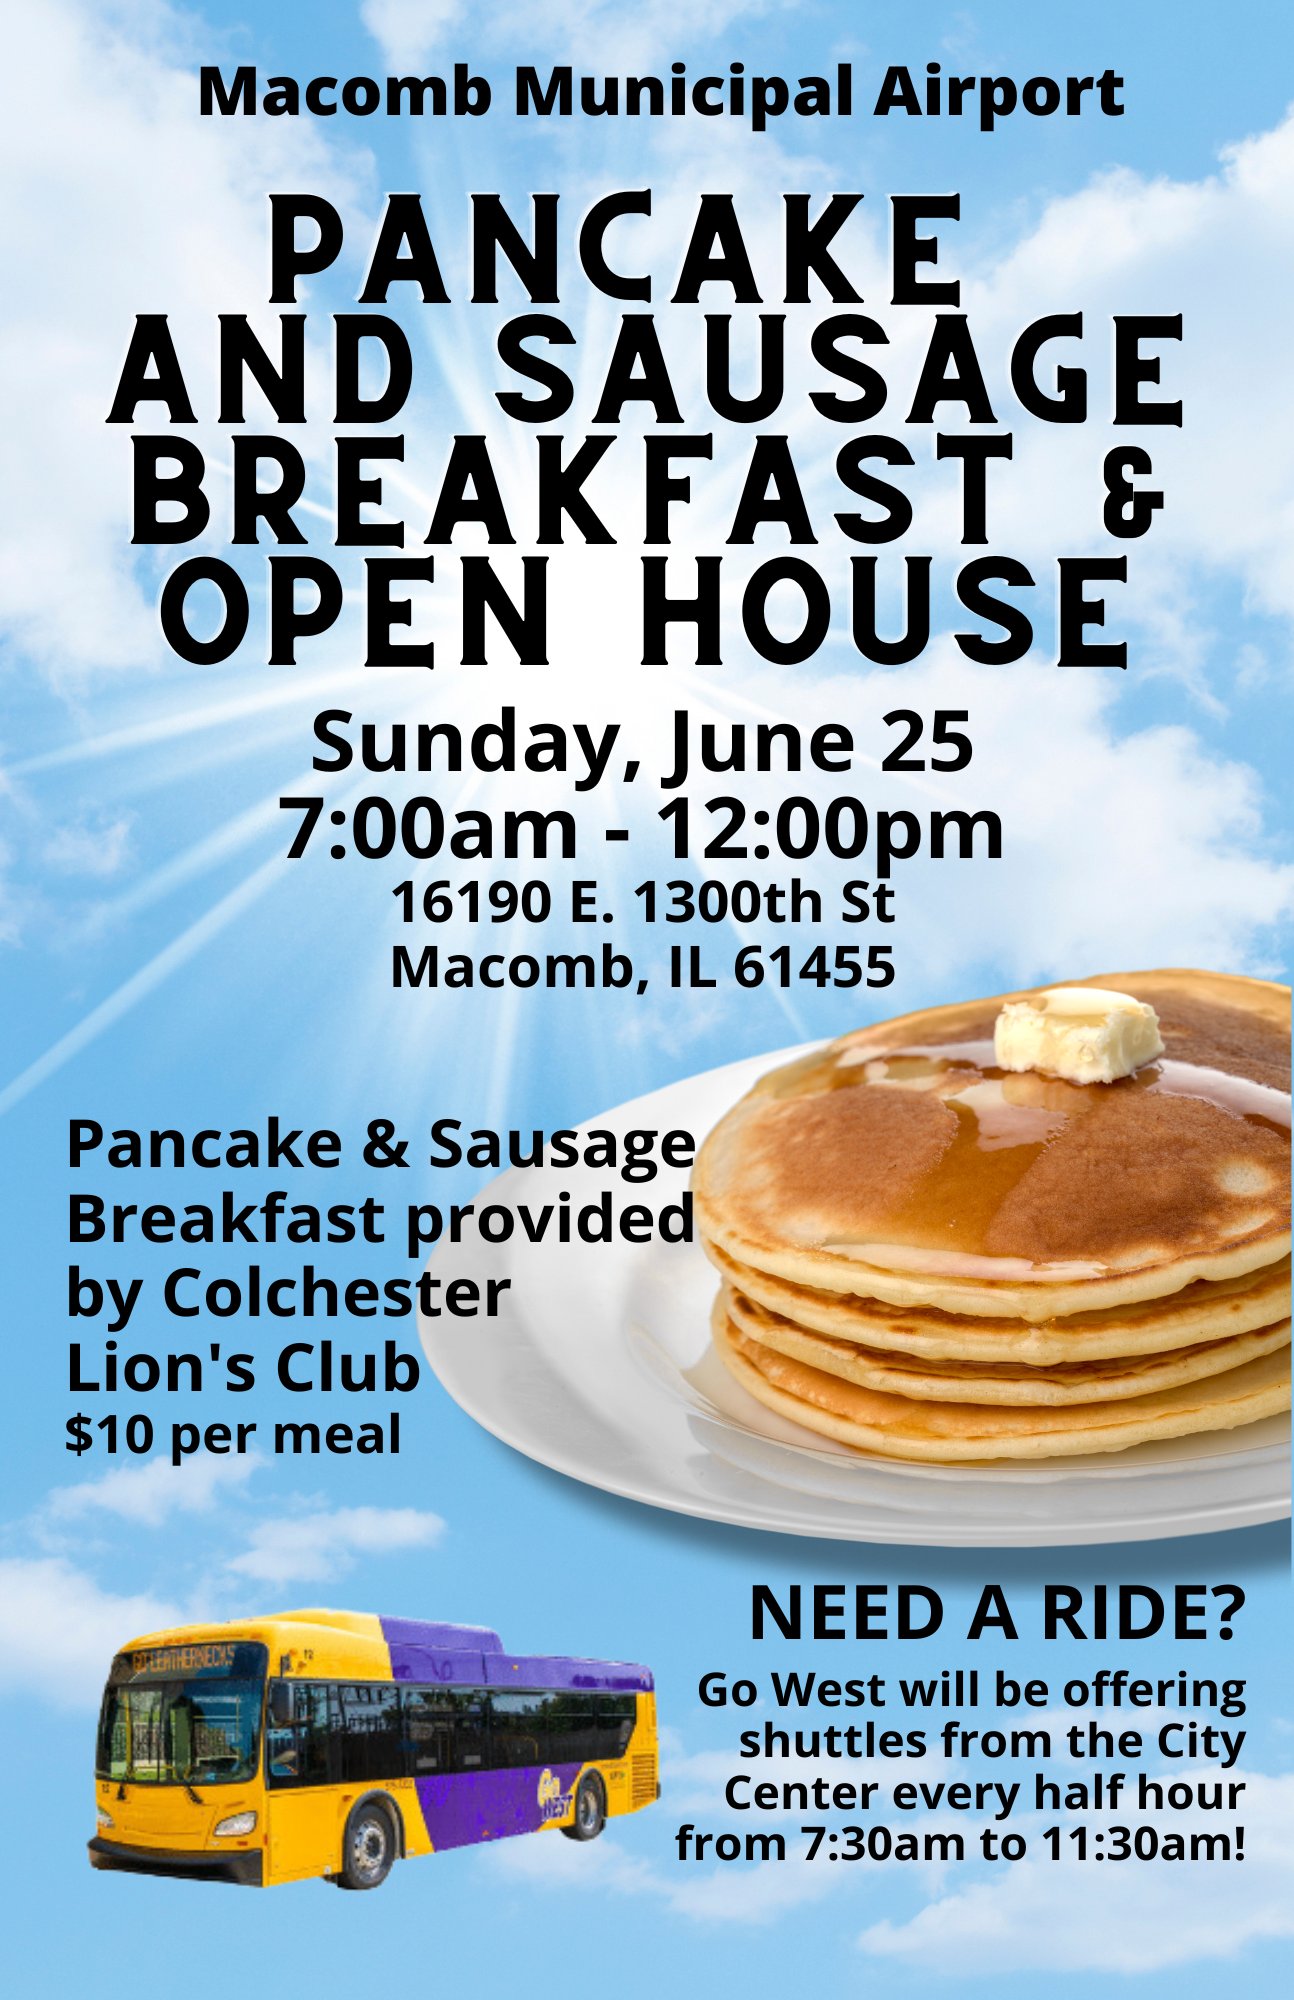 Pancake and Sausage Breakfast & Open House